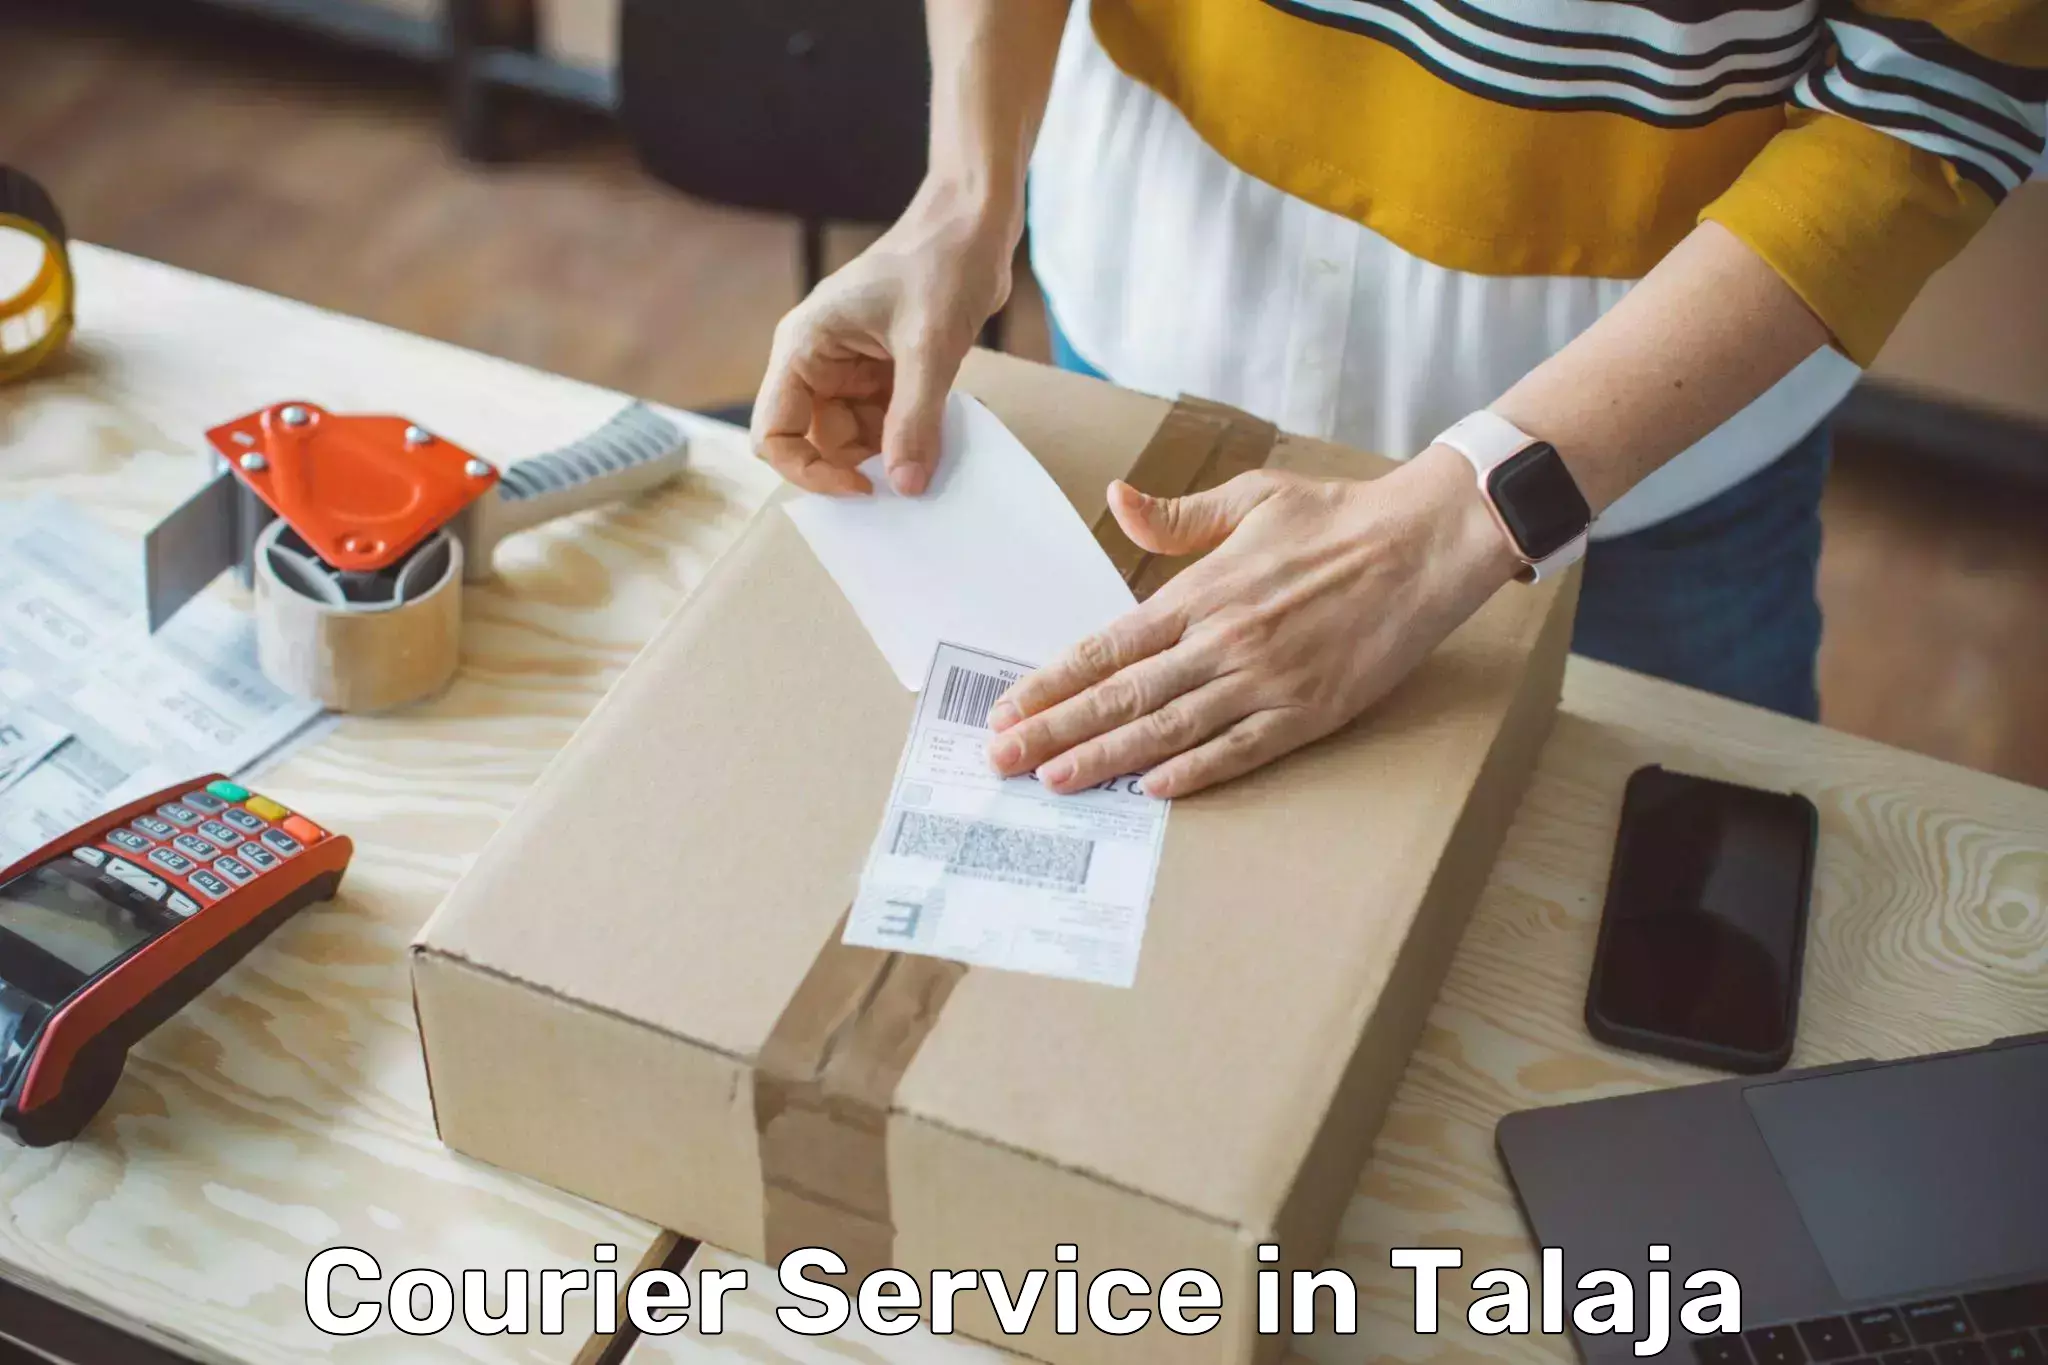 Postal and courier services in Talaja